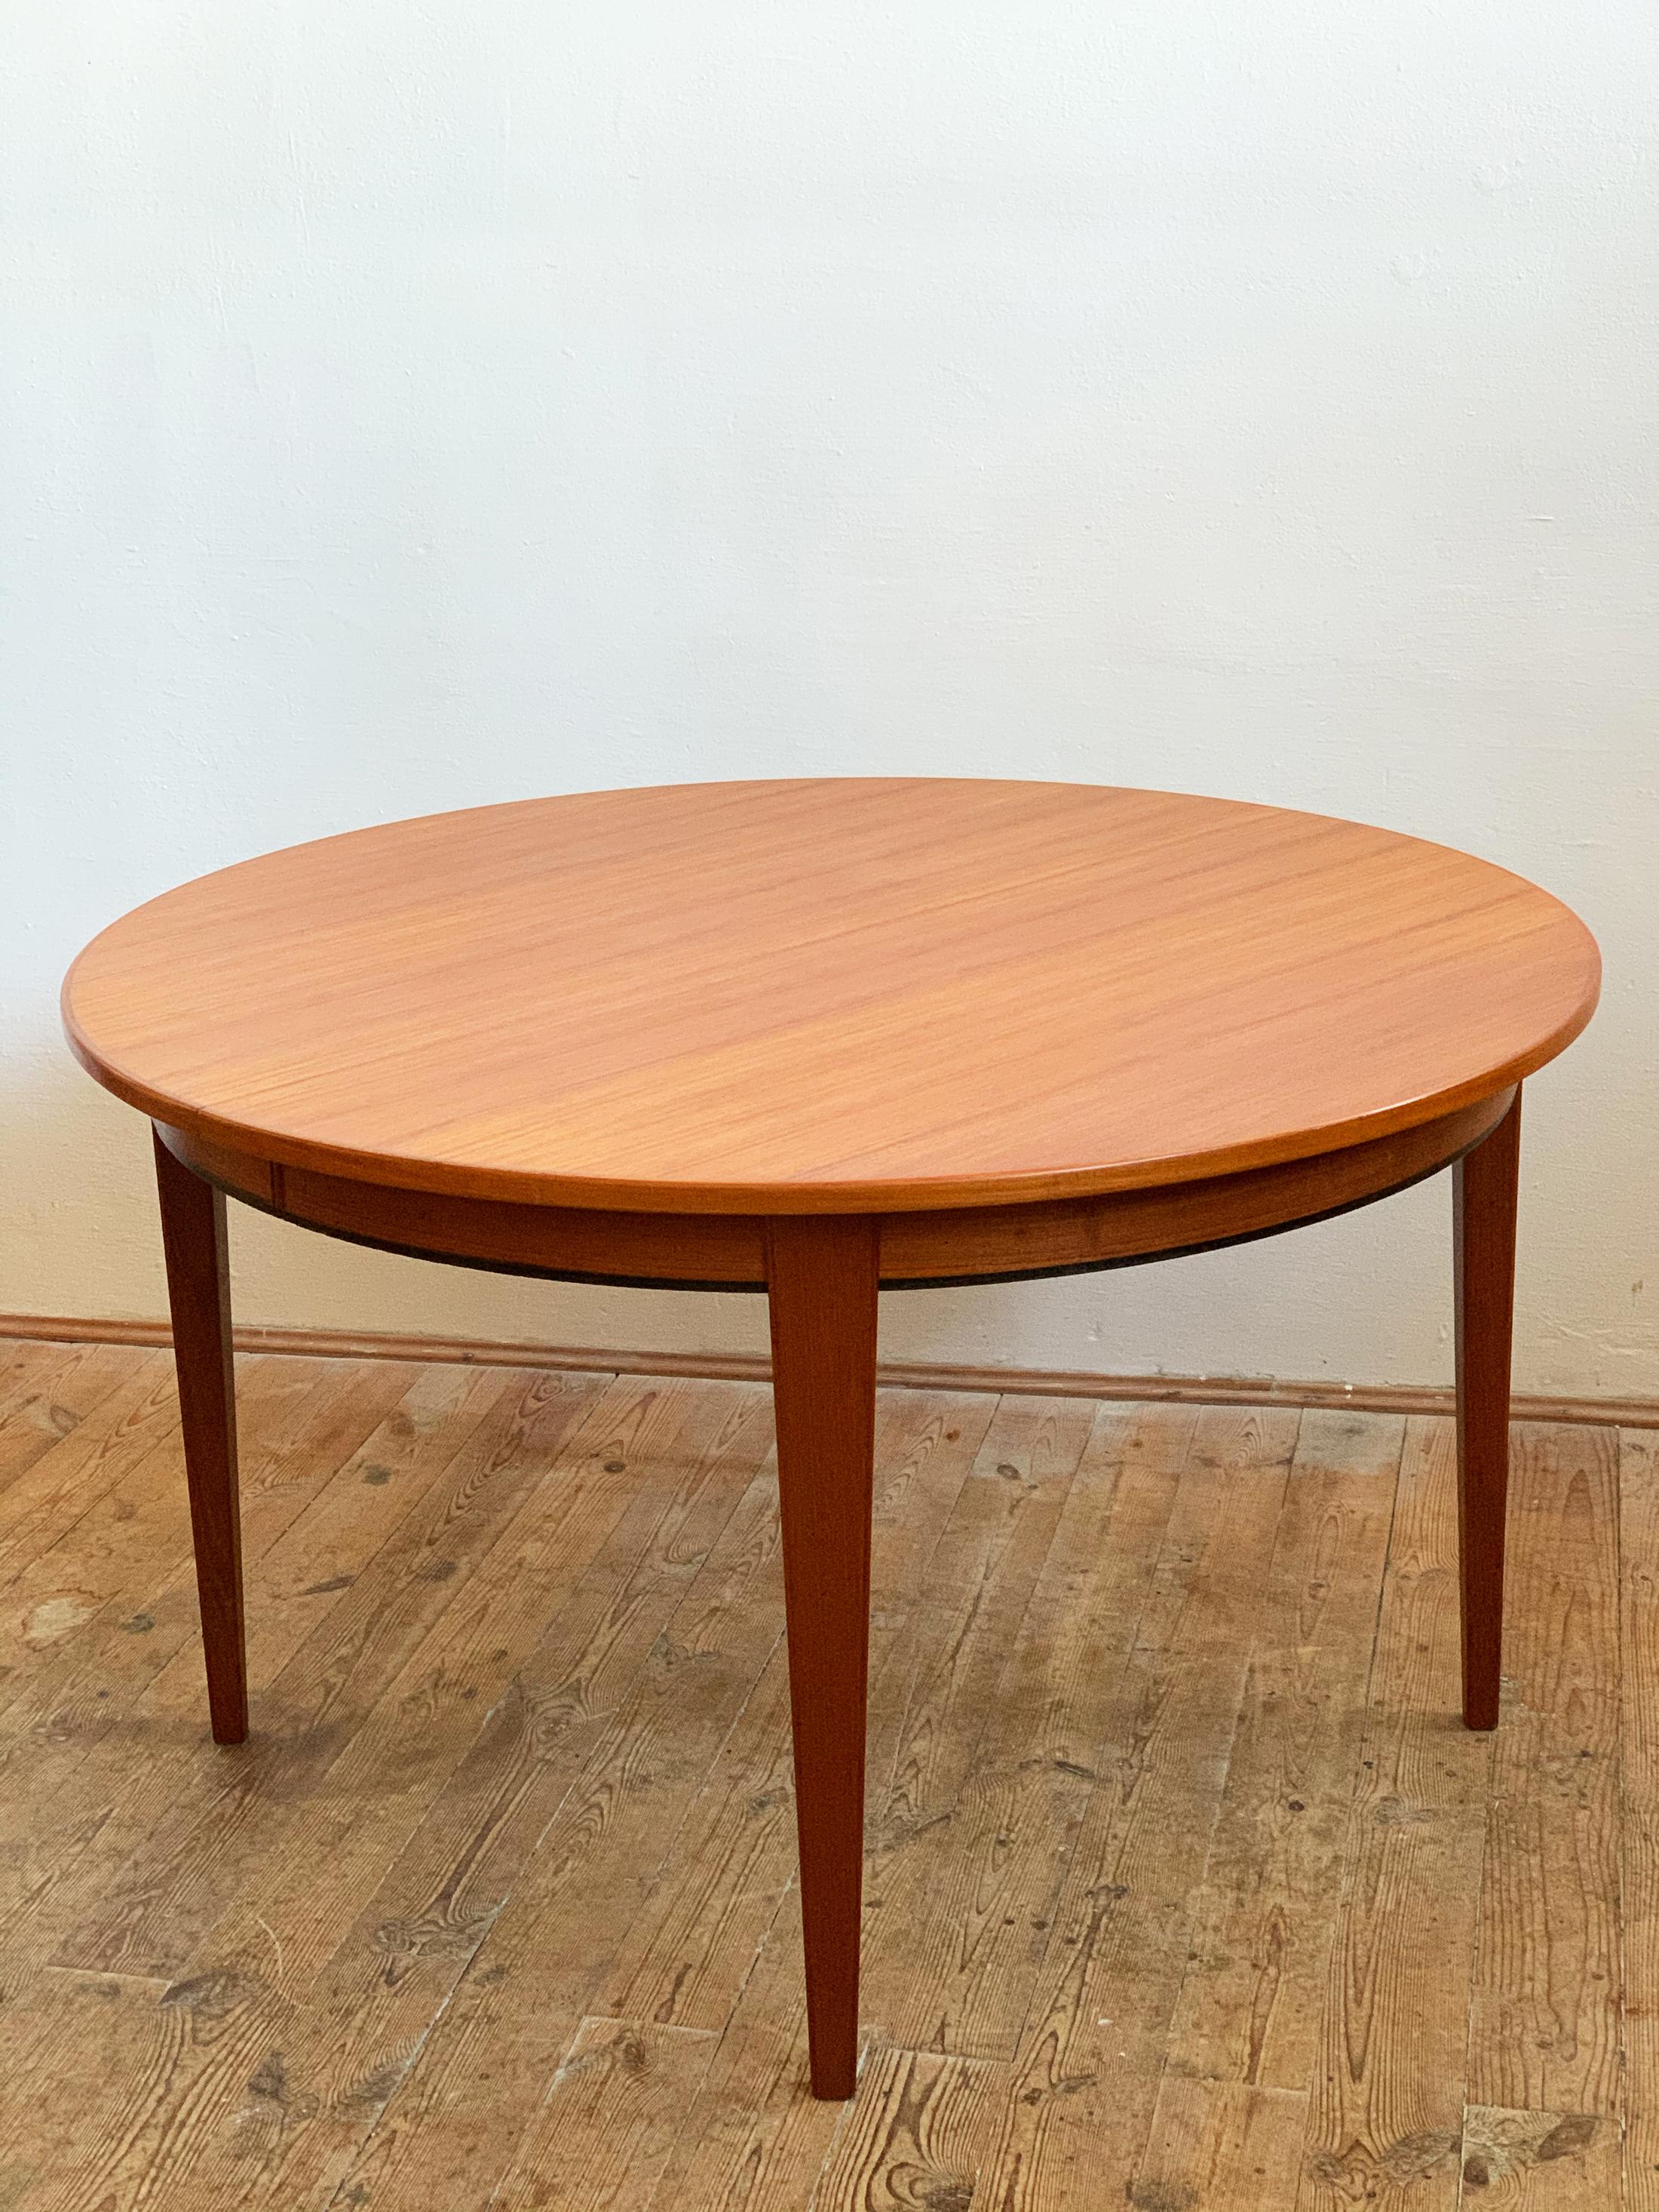 Round Danish Mid-Century Modern Extendable Teak Dining Table Made by Omann Jun For Sale 2